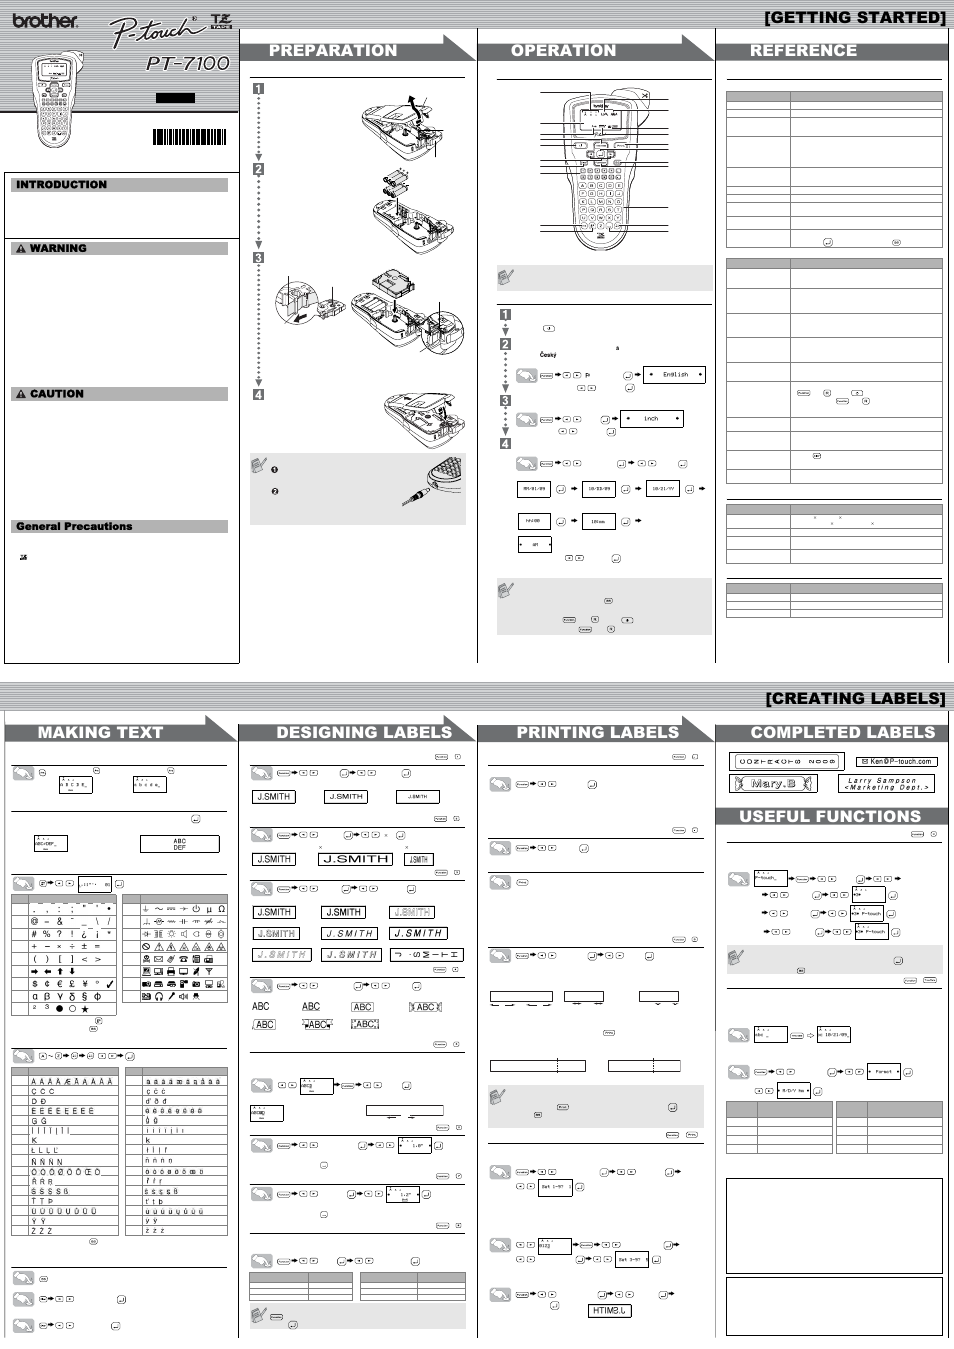 Brother P-TOUCH PT-7100 User Manual | 1 page